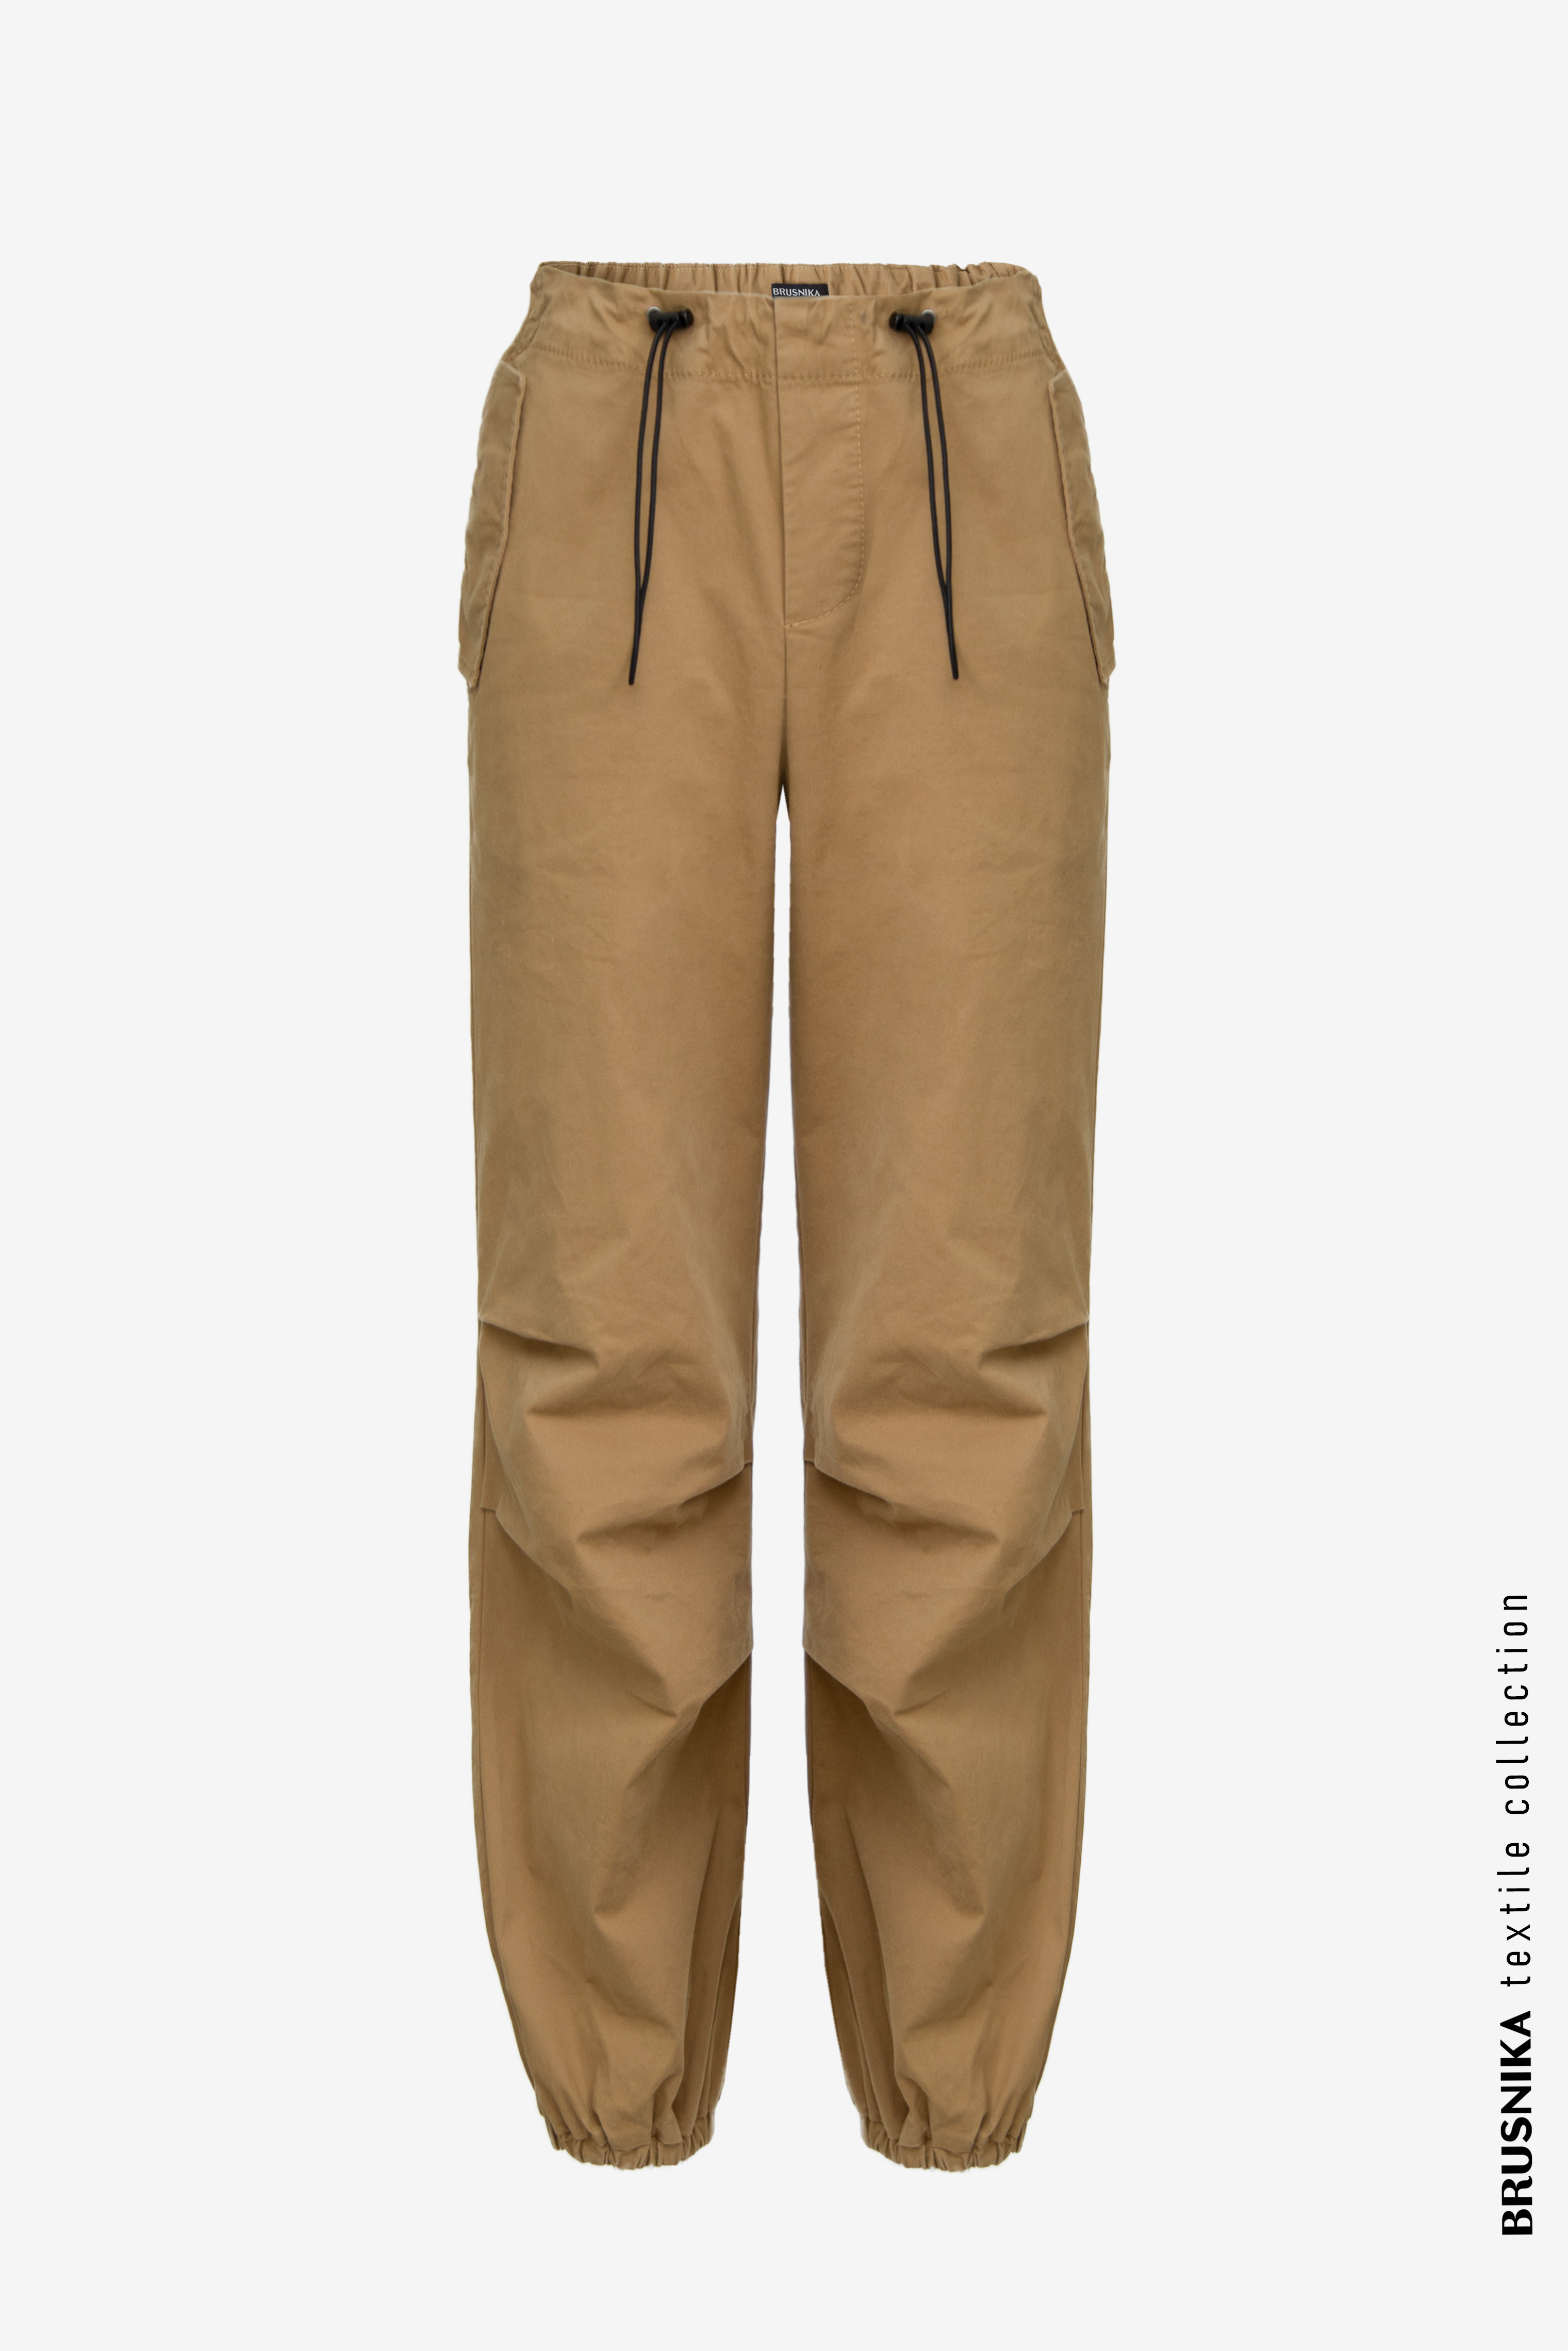 Trousers 4349-128 Camel from BRUSNiKA